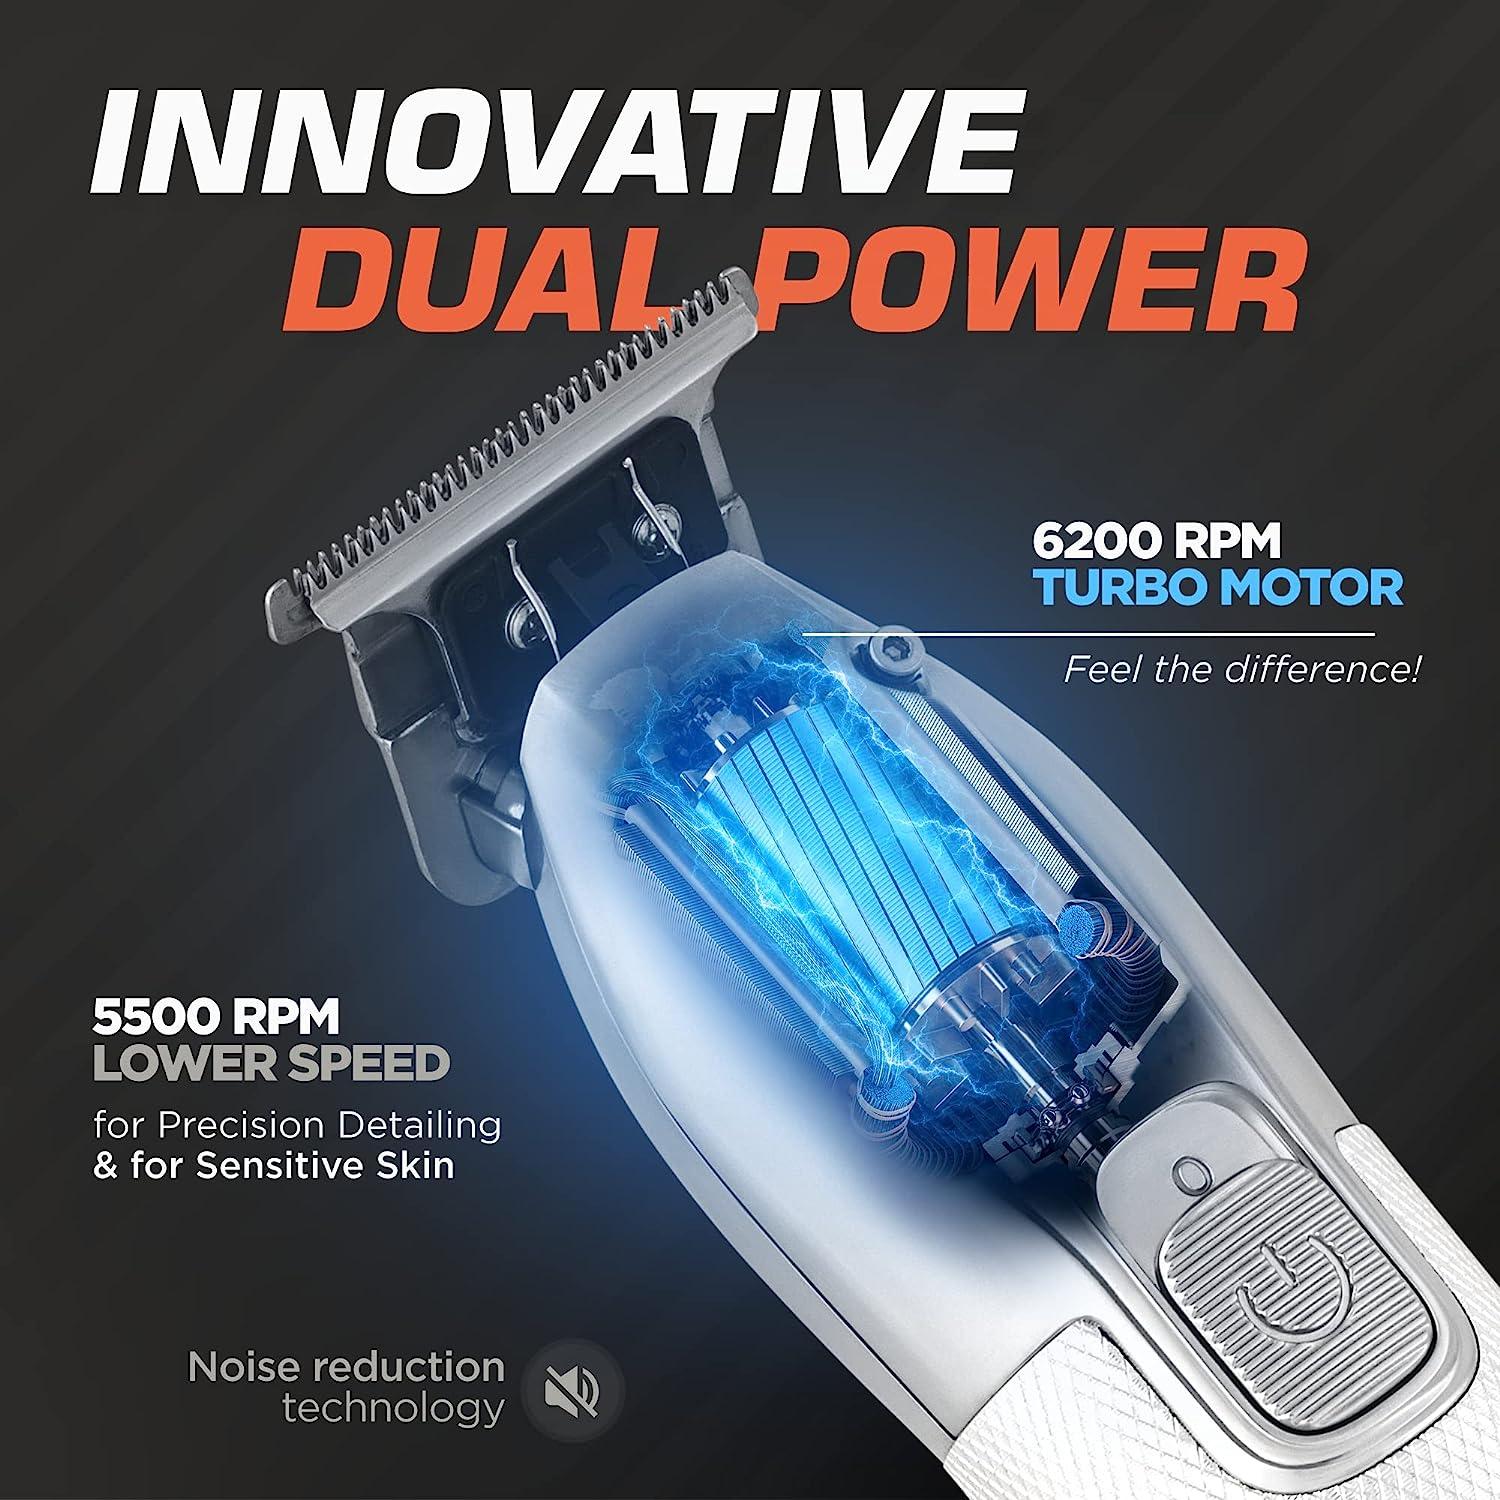 Fagaci Professional Hair Clippers for Men Set Turbo Power with Precise  Cutting, Barber Clippers for Hair Cutting, Cordless Hair Clippers and  Trimmers Set, Maquina de Cortar Cabello, Haircut Barber Kit